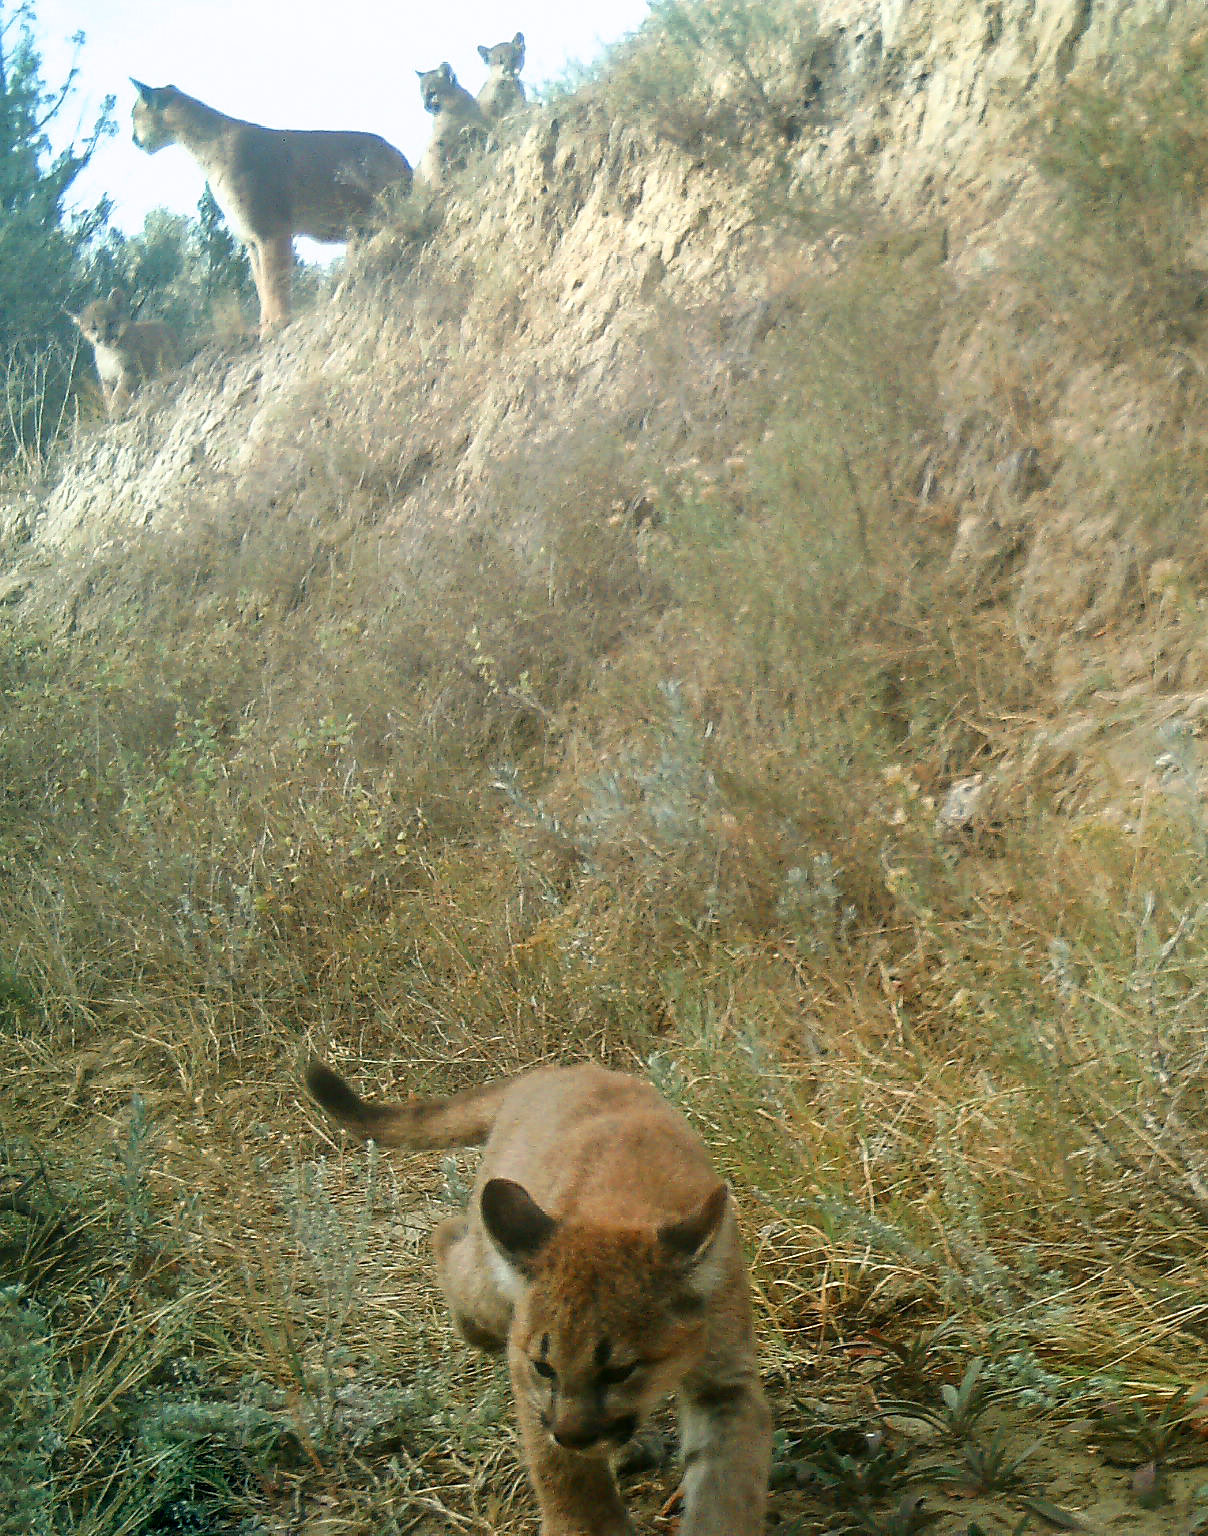 Trailcam photo of mountain lion with kittens